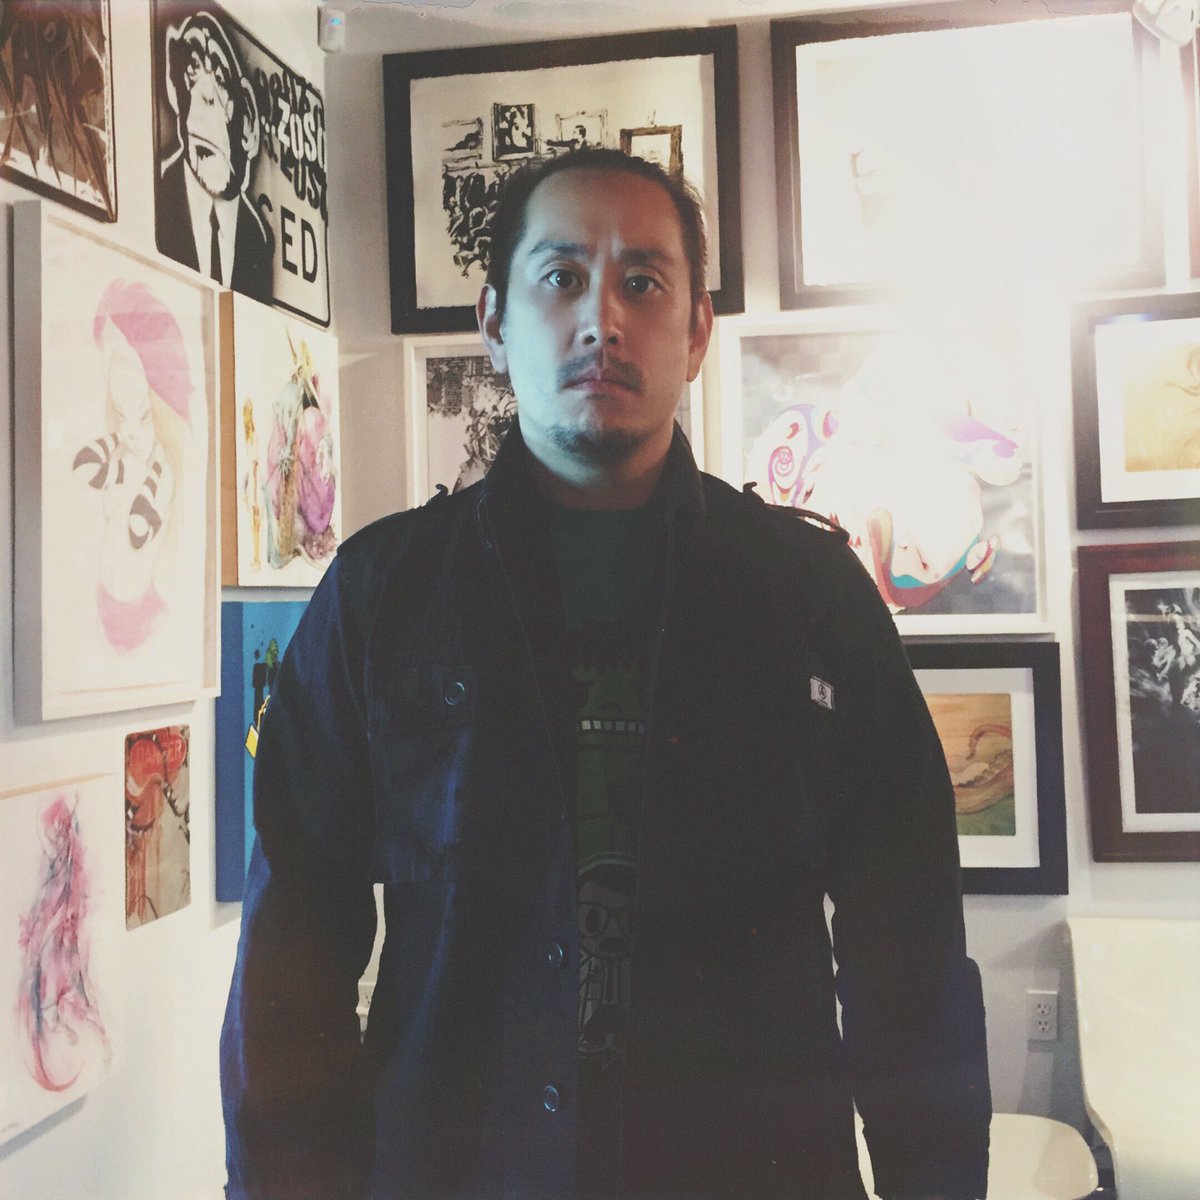 - @joehahnLP today at LINKIN PARK HQ https://t.co/JAa9sO3O8w https://t.co/aG01ouuGZC